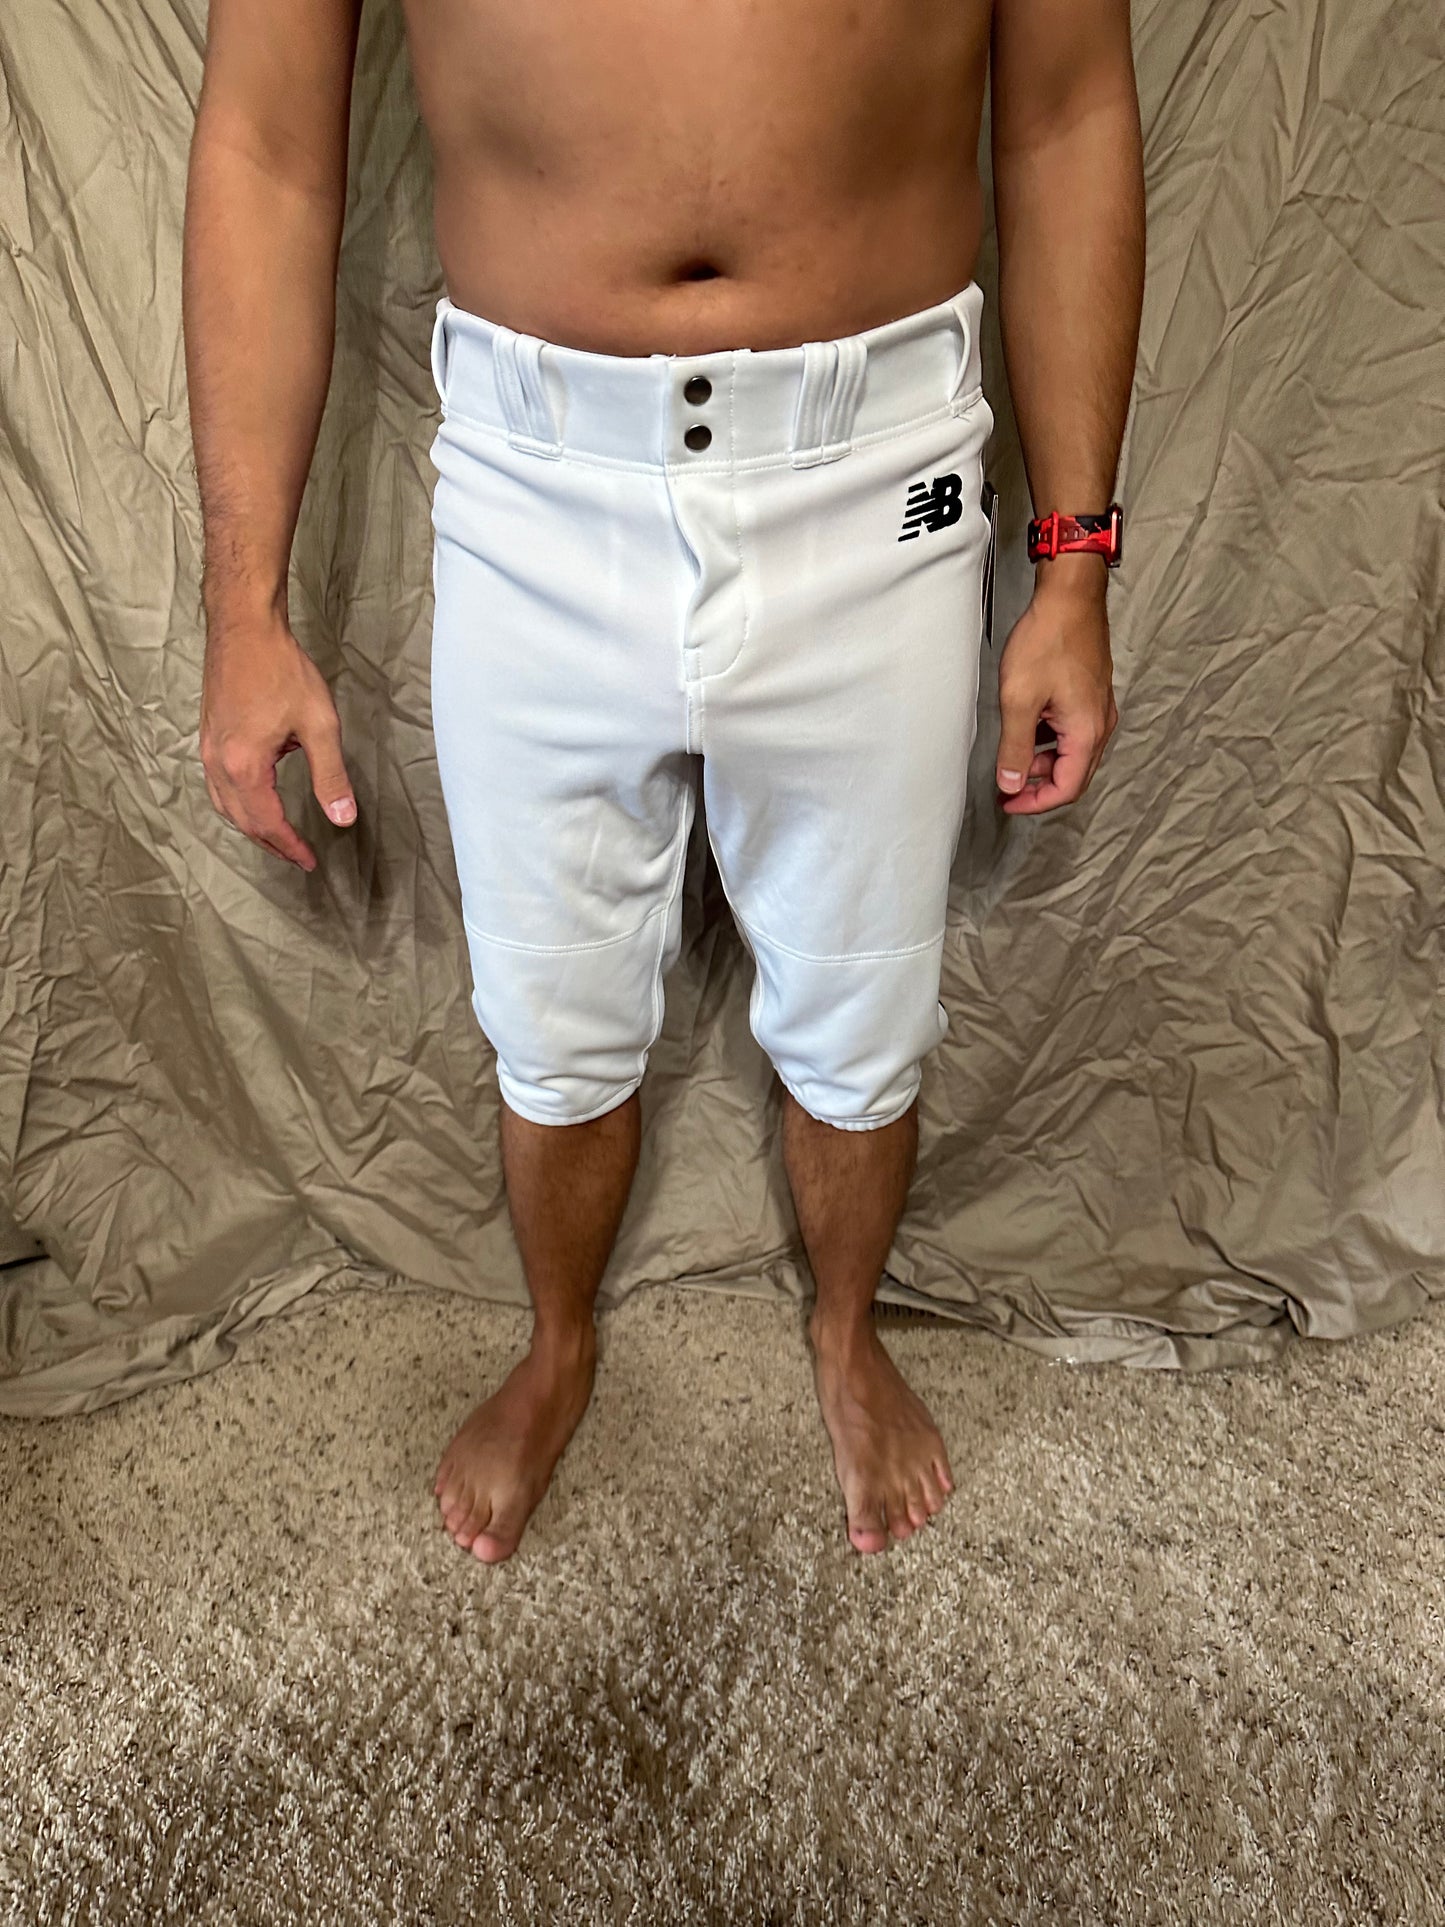 Youth boys large white new balance baseball pants new with tags